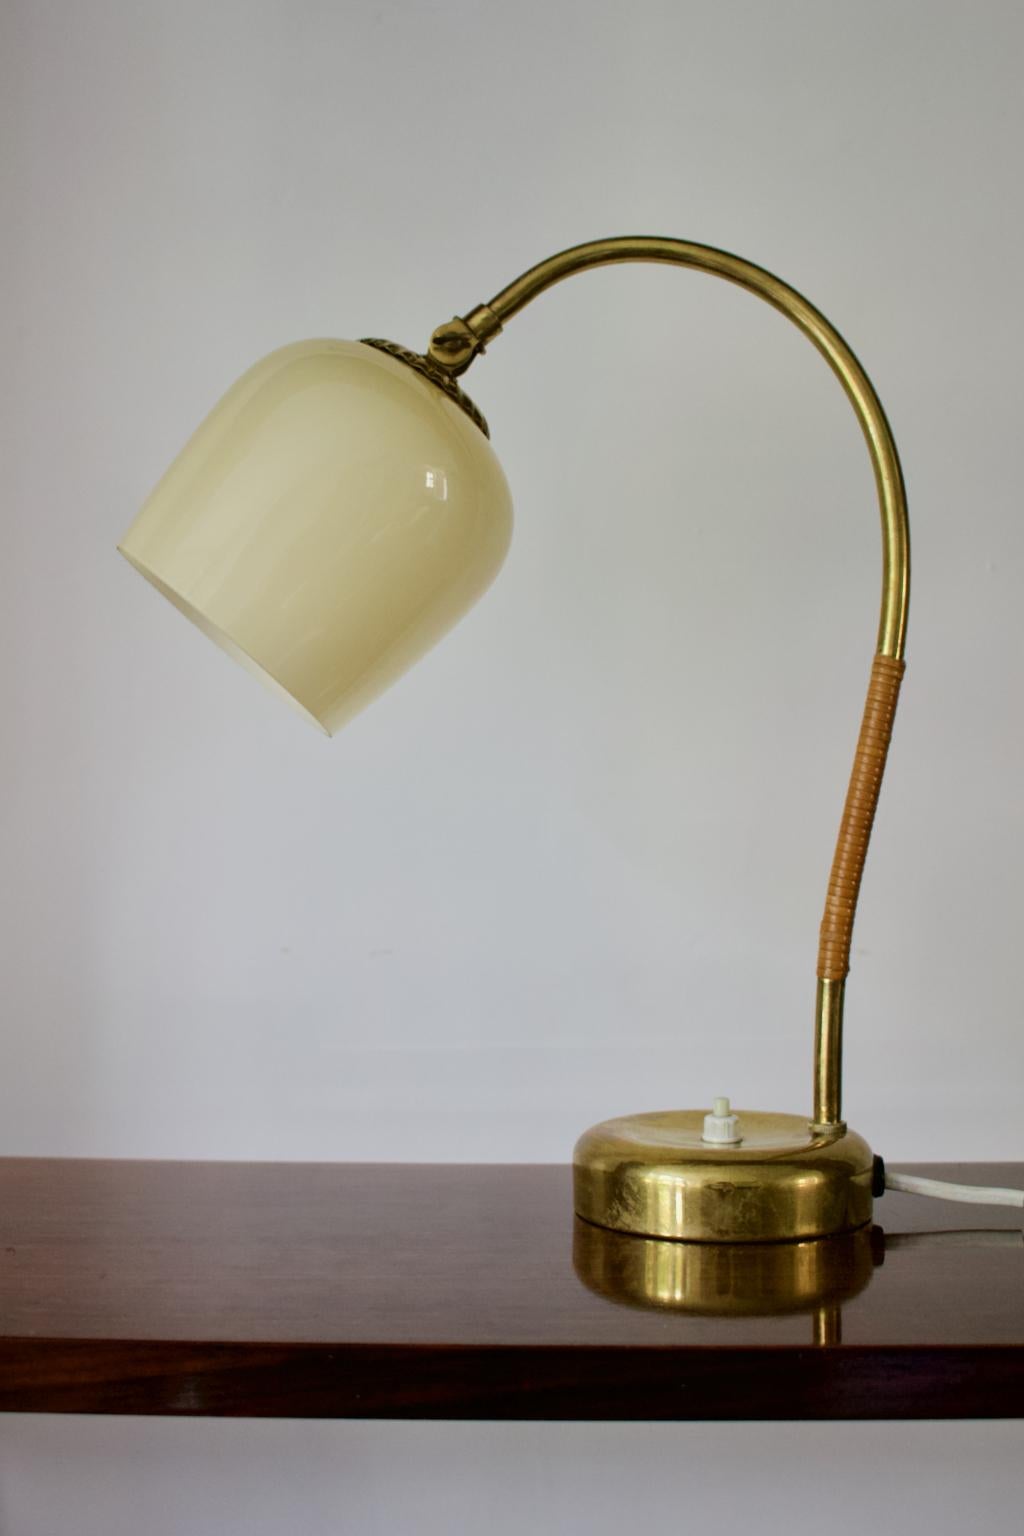 Brass table lamp with glass shade by Idman Oy, Finland 1950s. Signed 